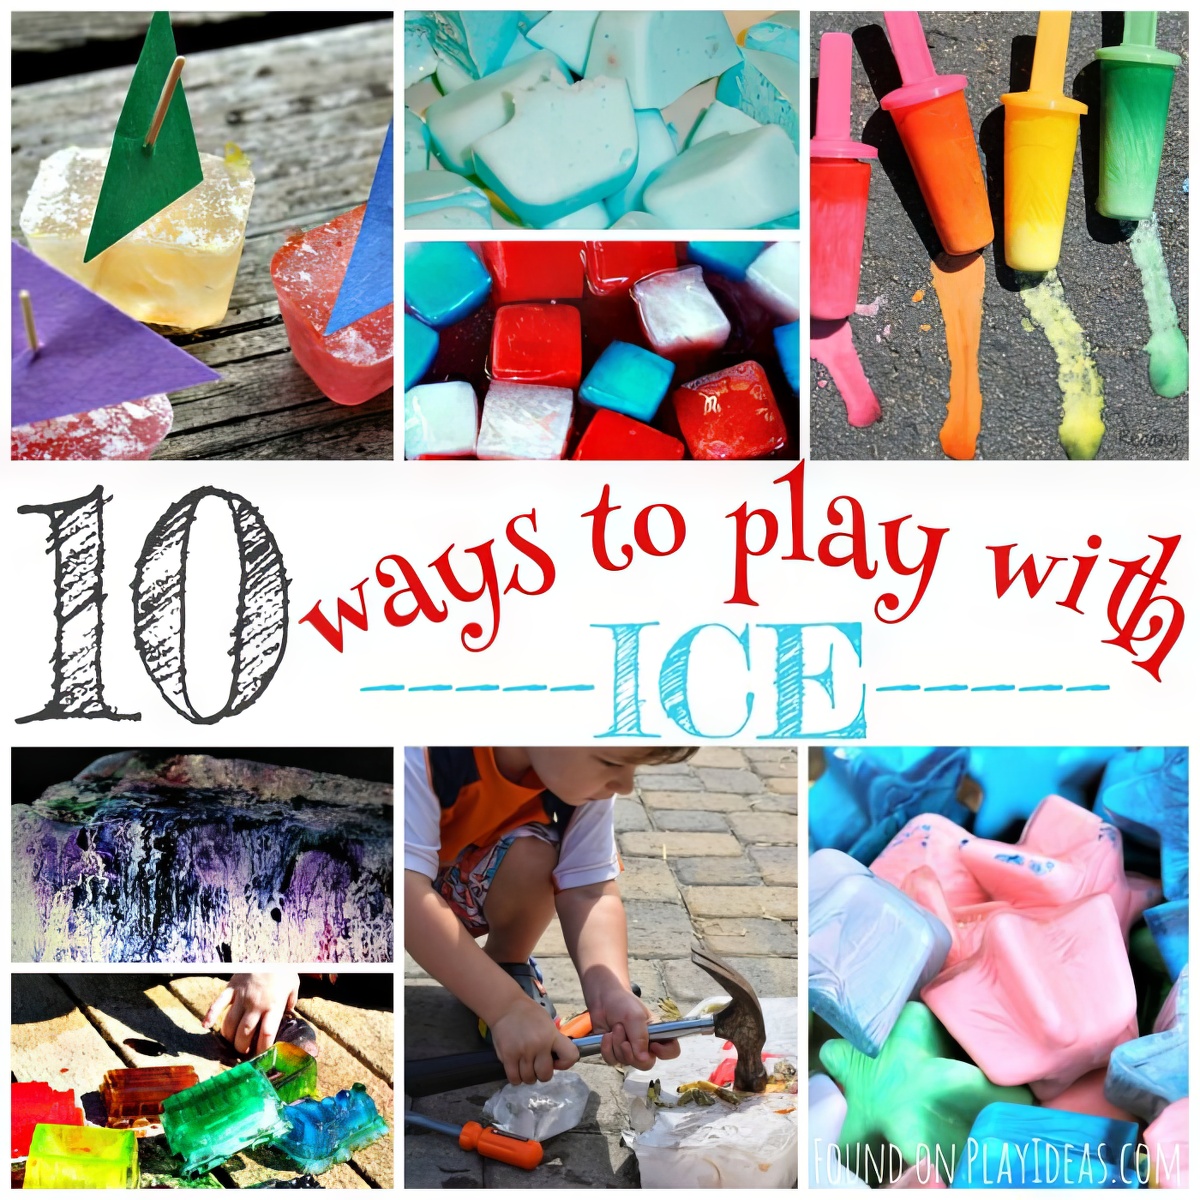 Learn and enjoy these fun 10 easy ways to play with ice with your kids!